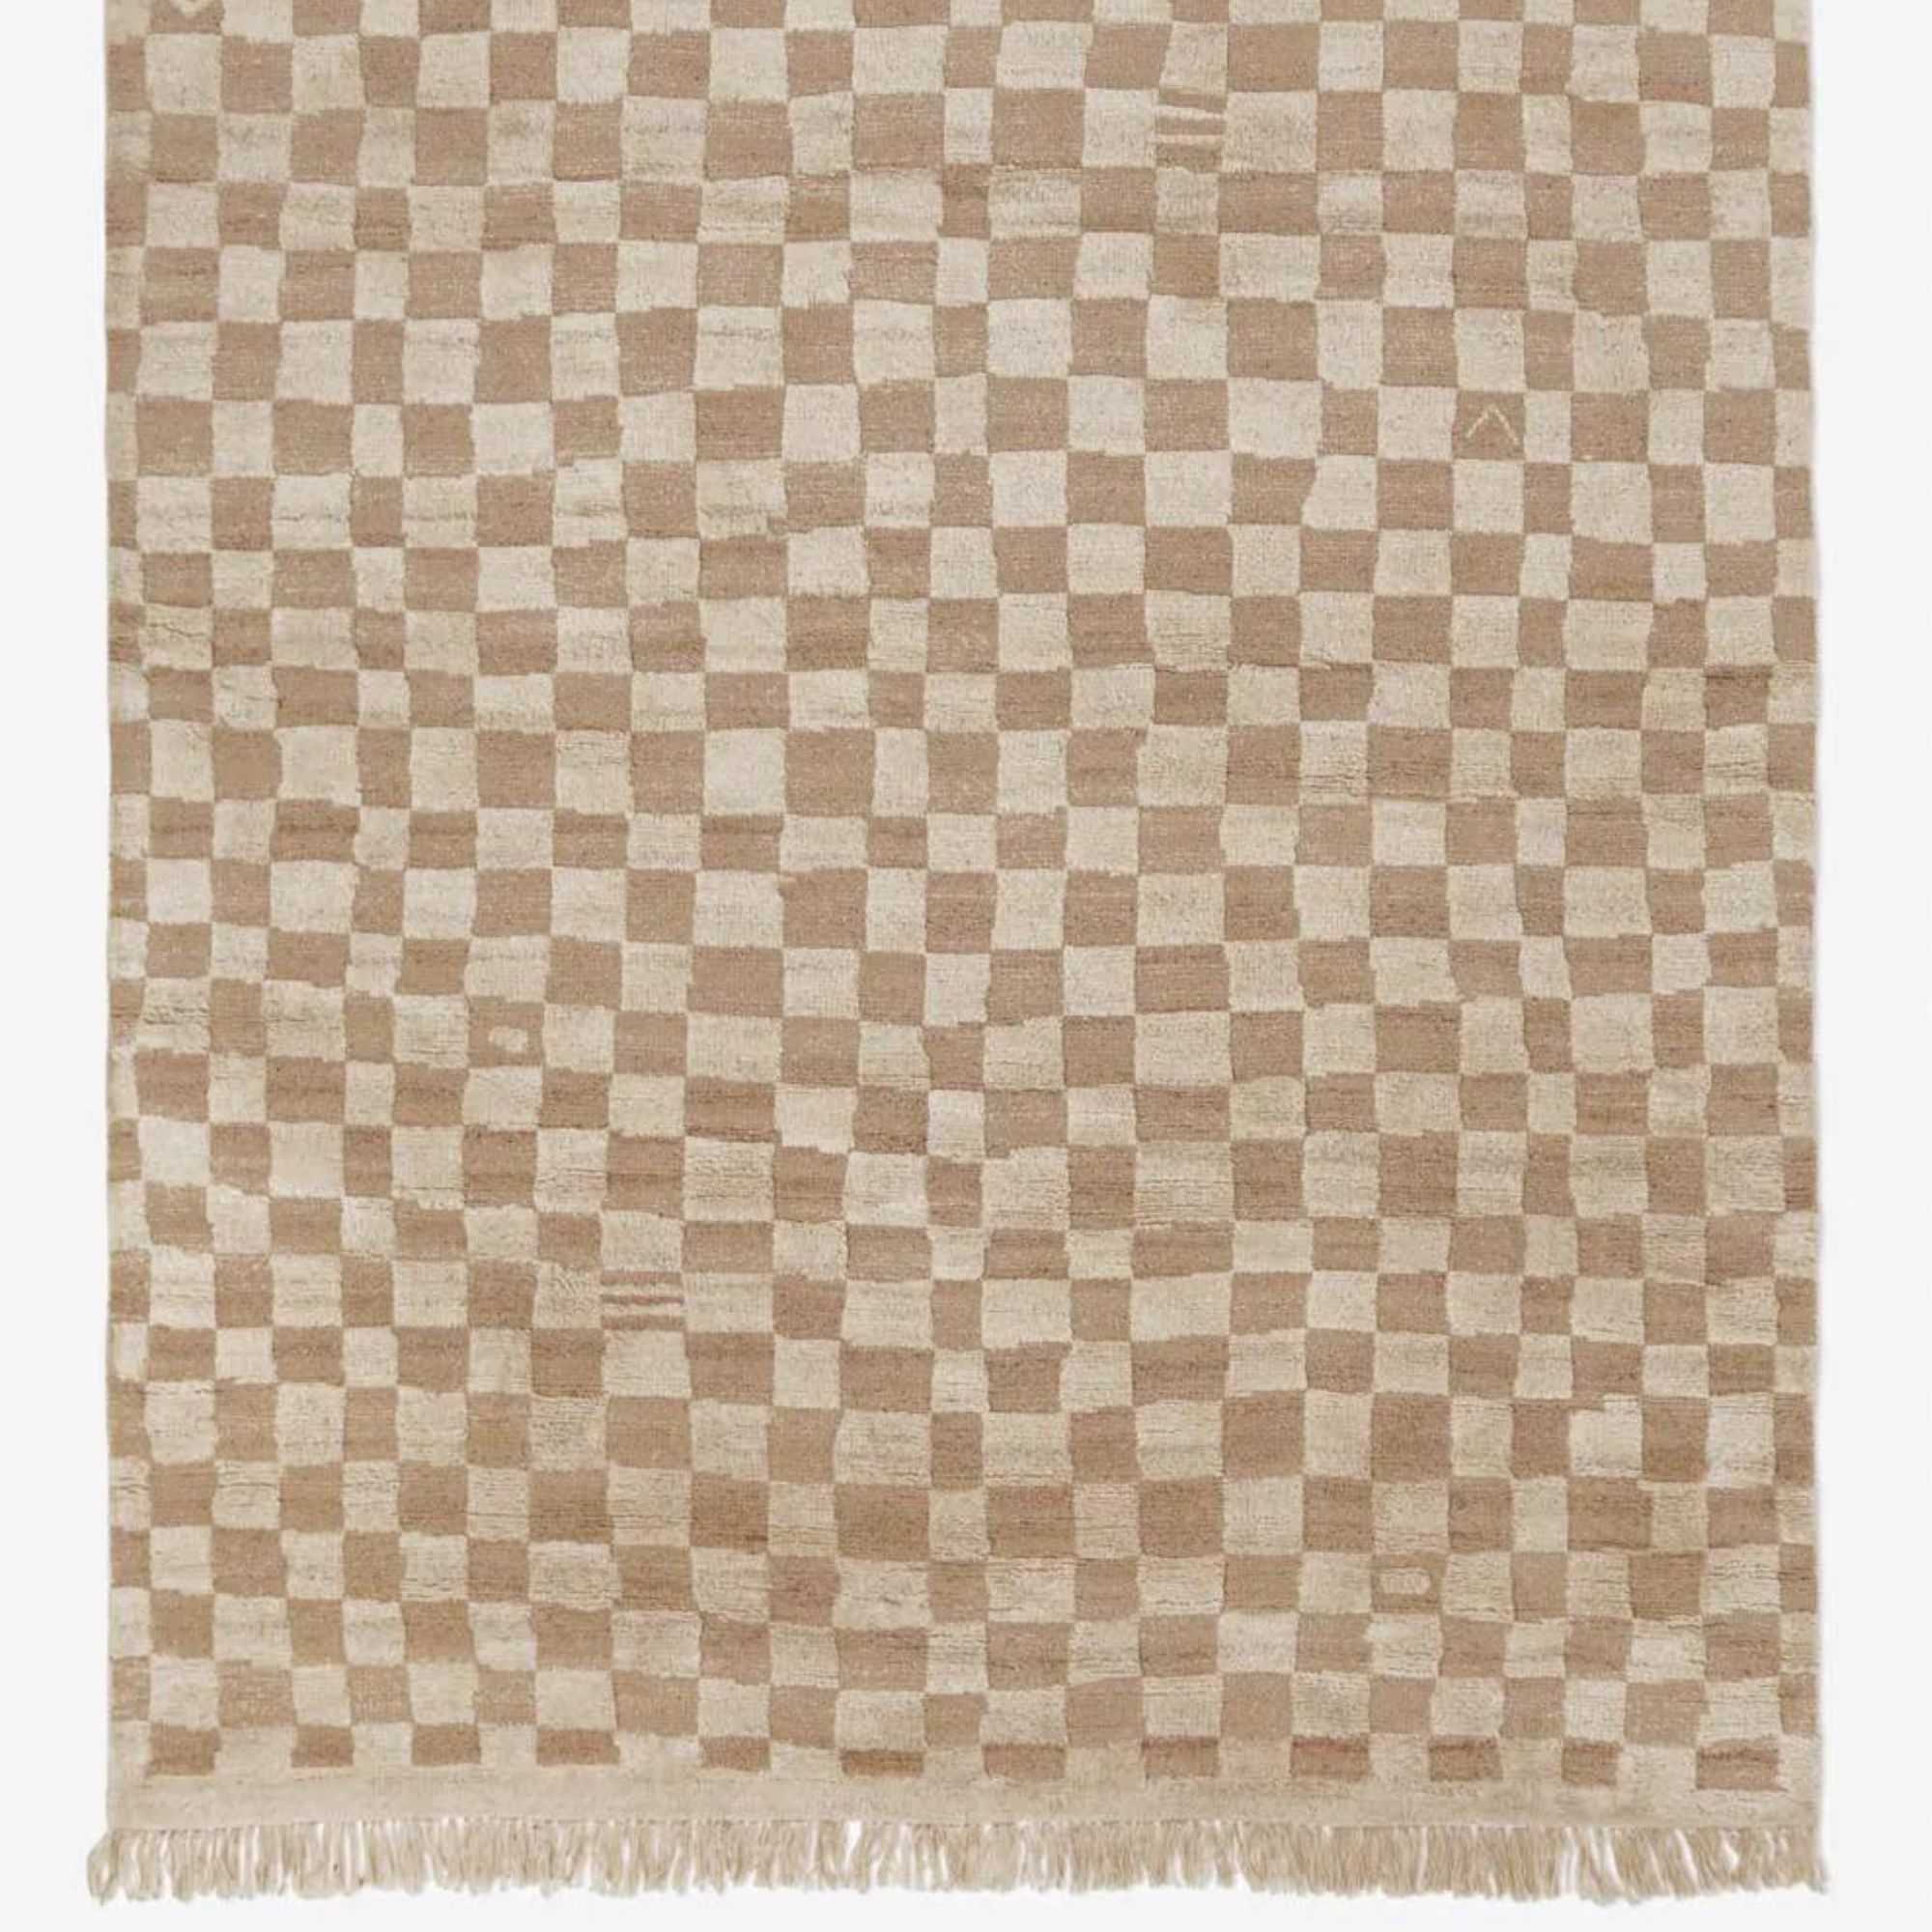 Irregular Checkerboard Hand-Knotted Wool Rug